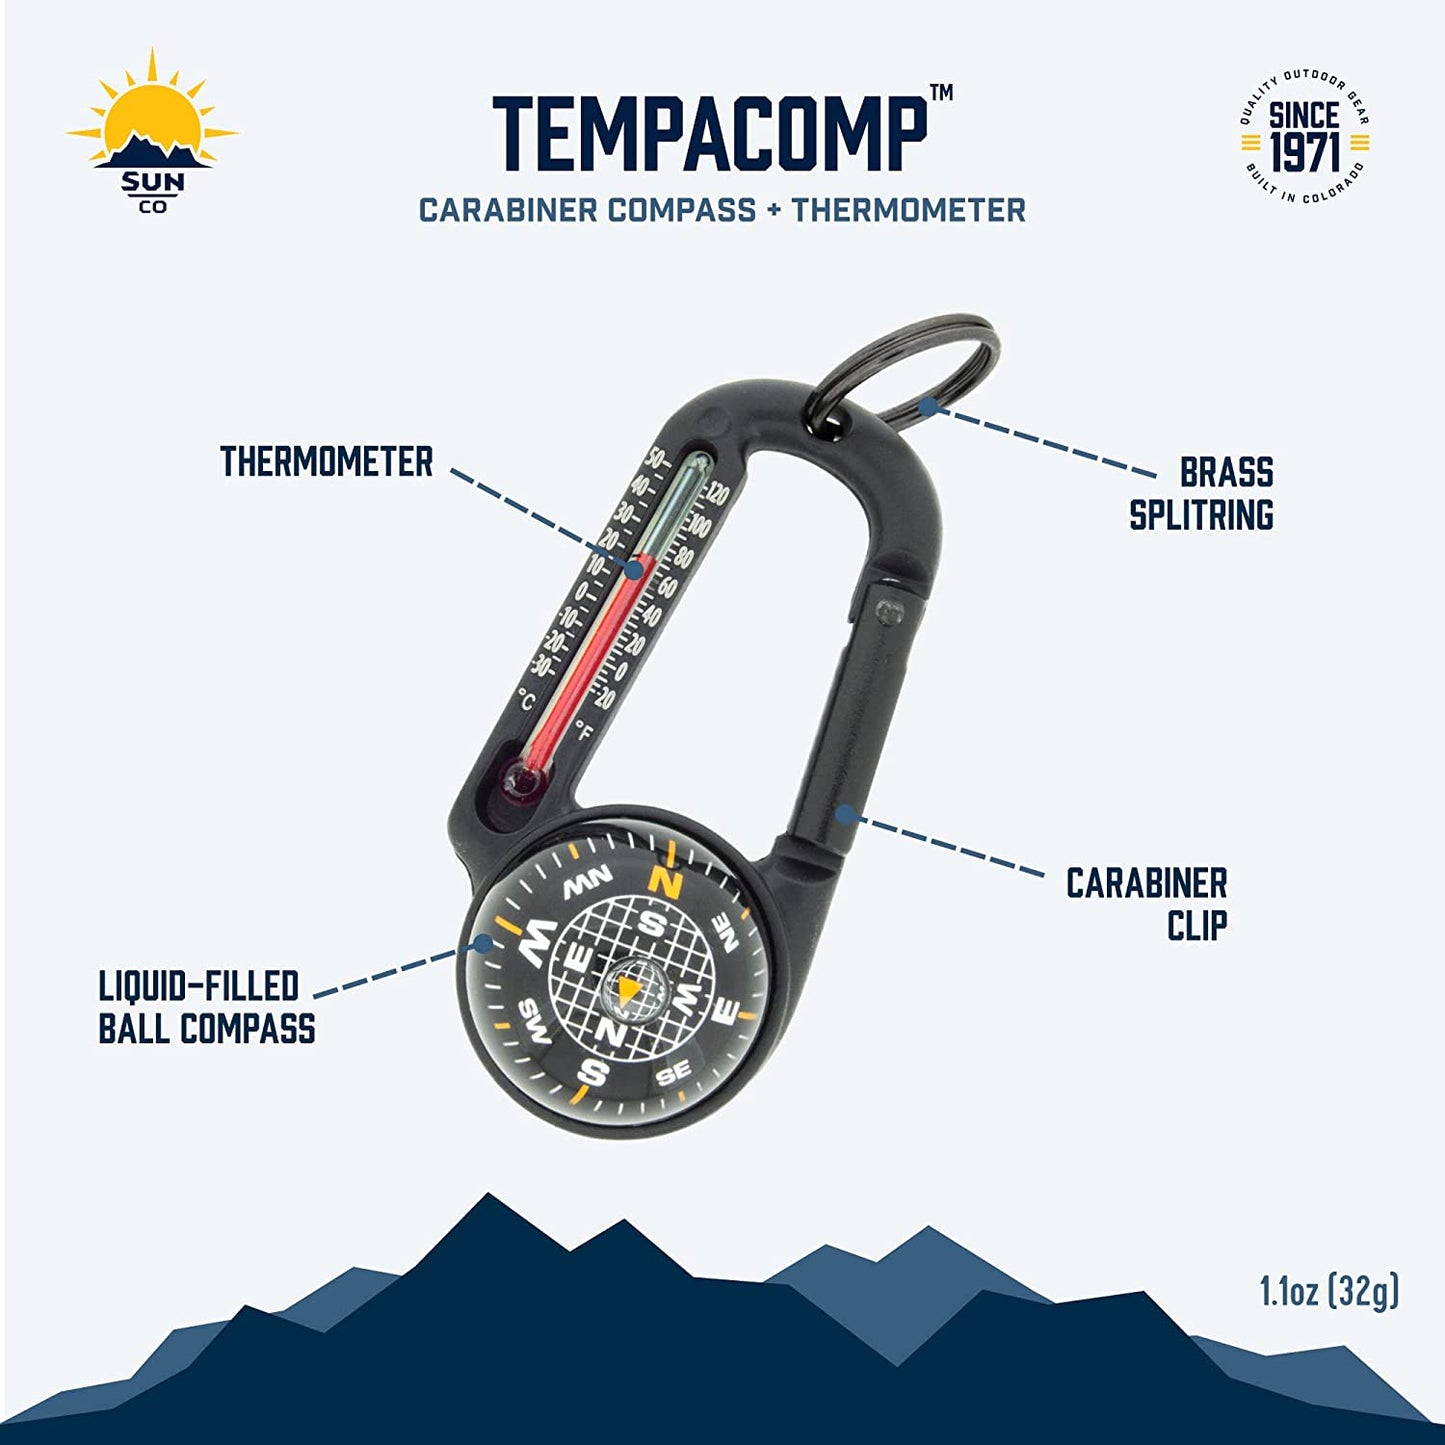 Ball Compass & Thermometer Carabiner